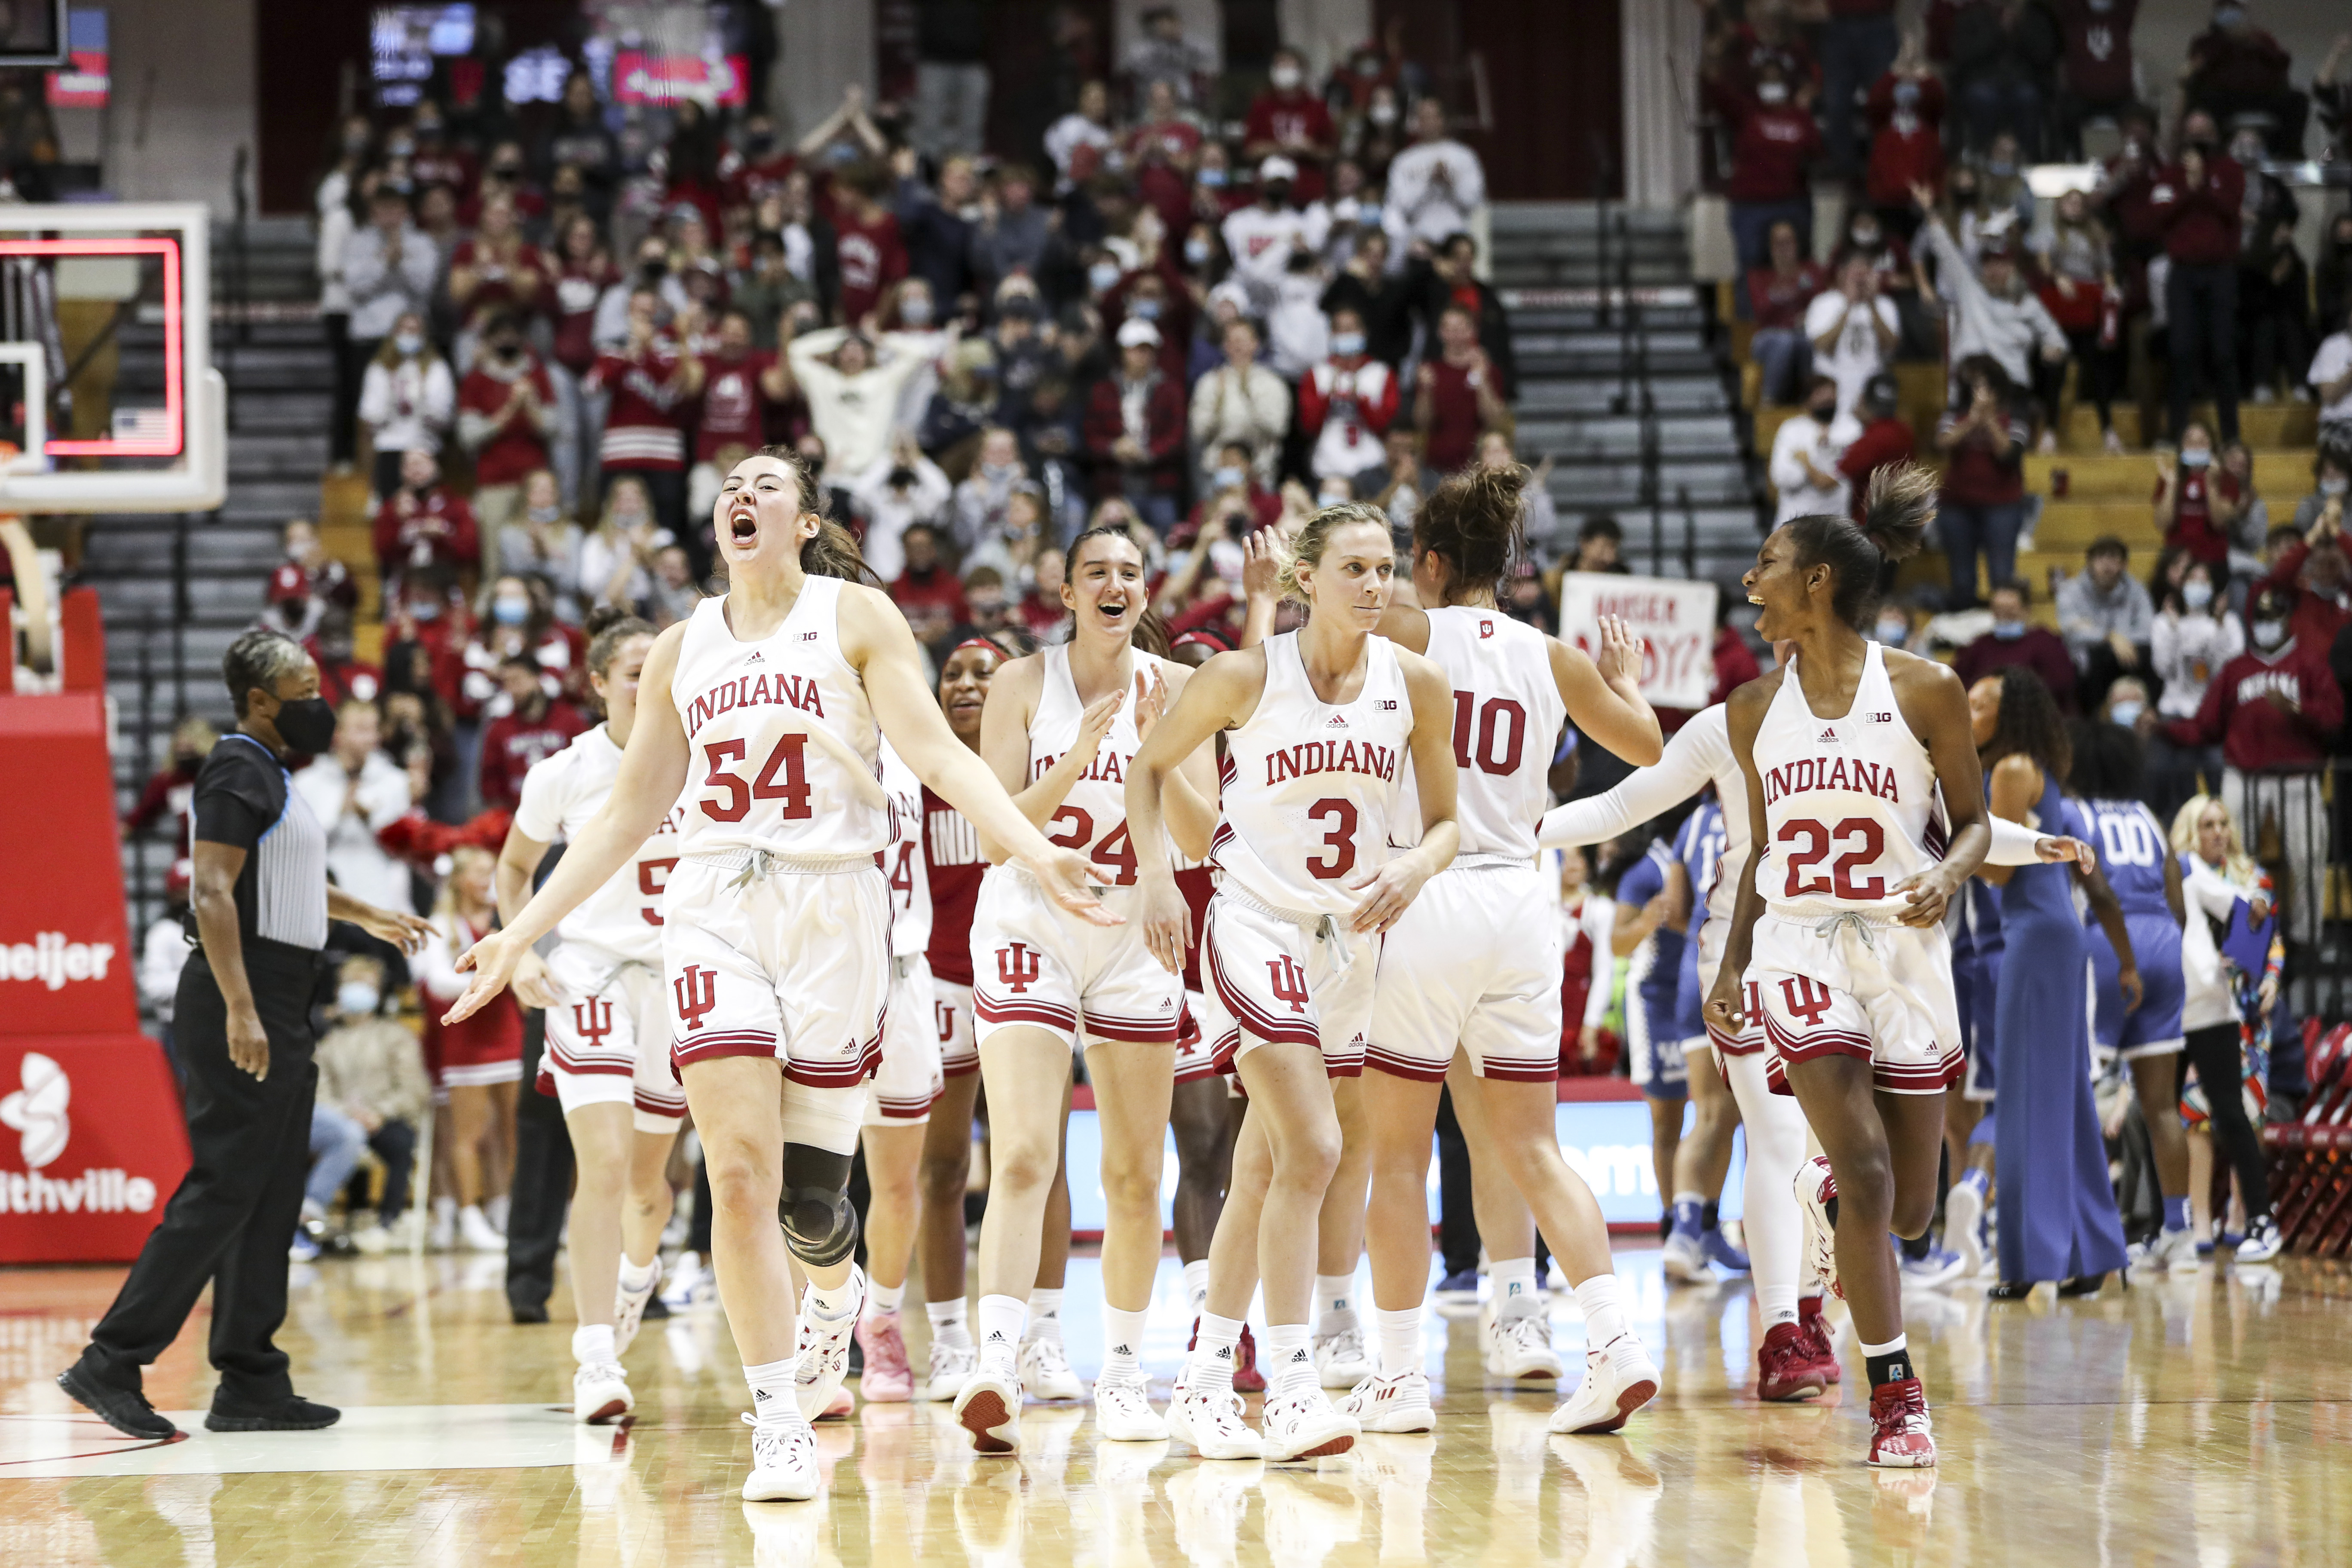 Mackenzie Holmes heads to the court followed by her teammates at Indiana's home game versus Kentucky.